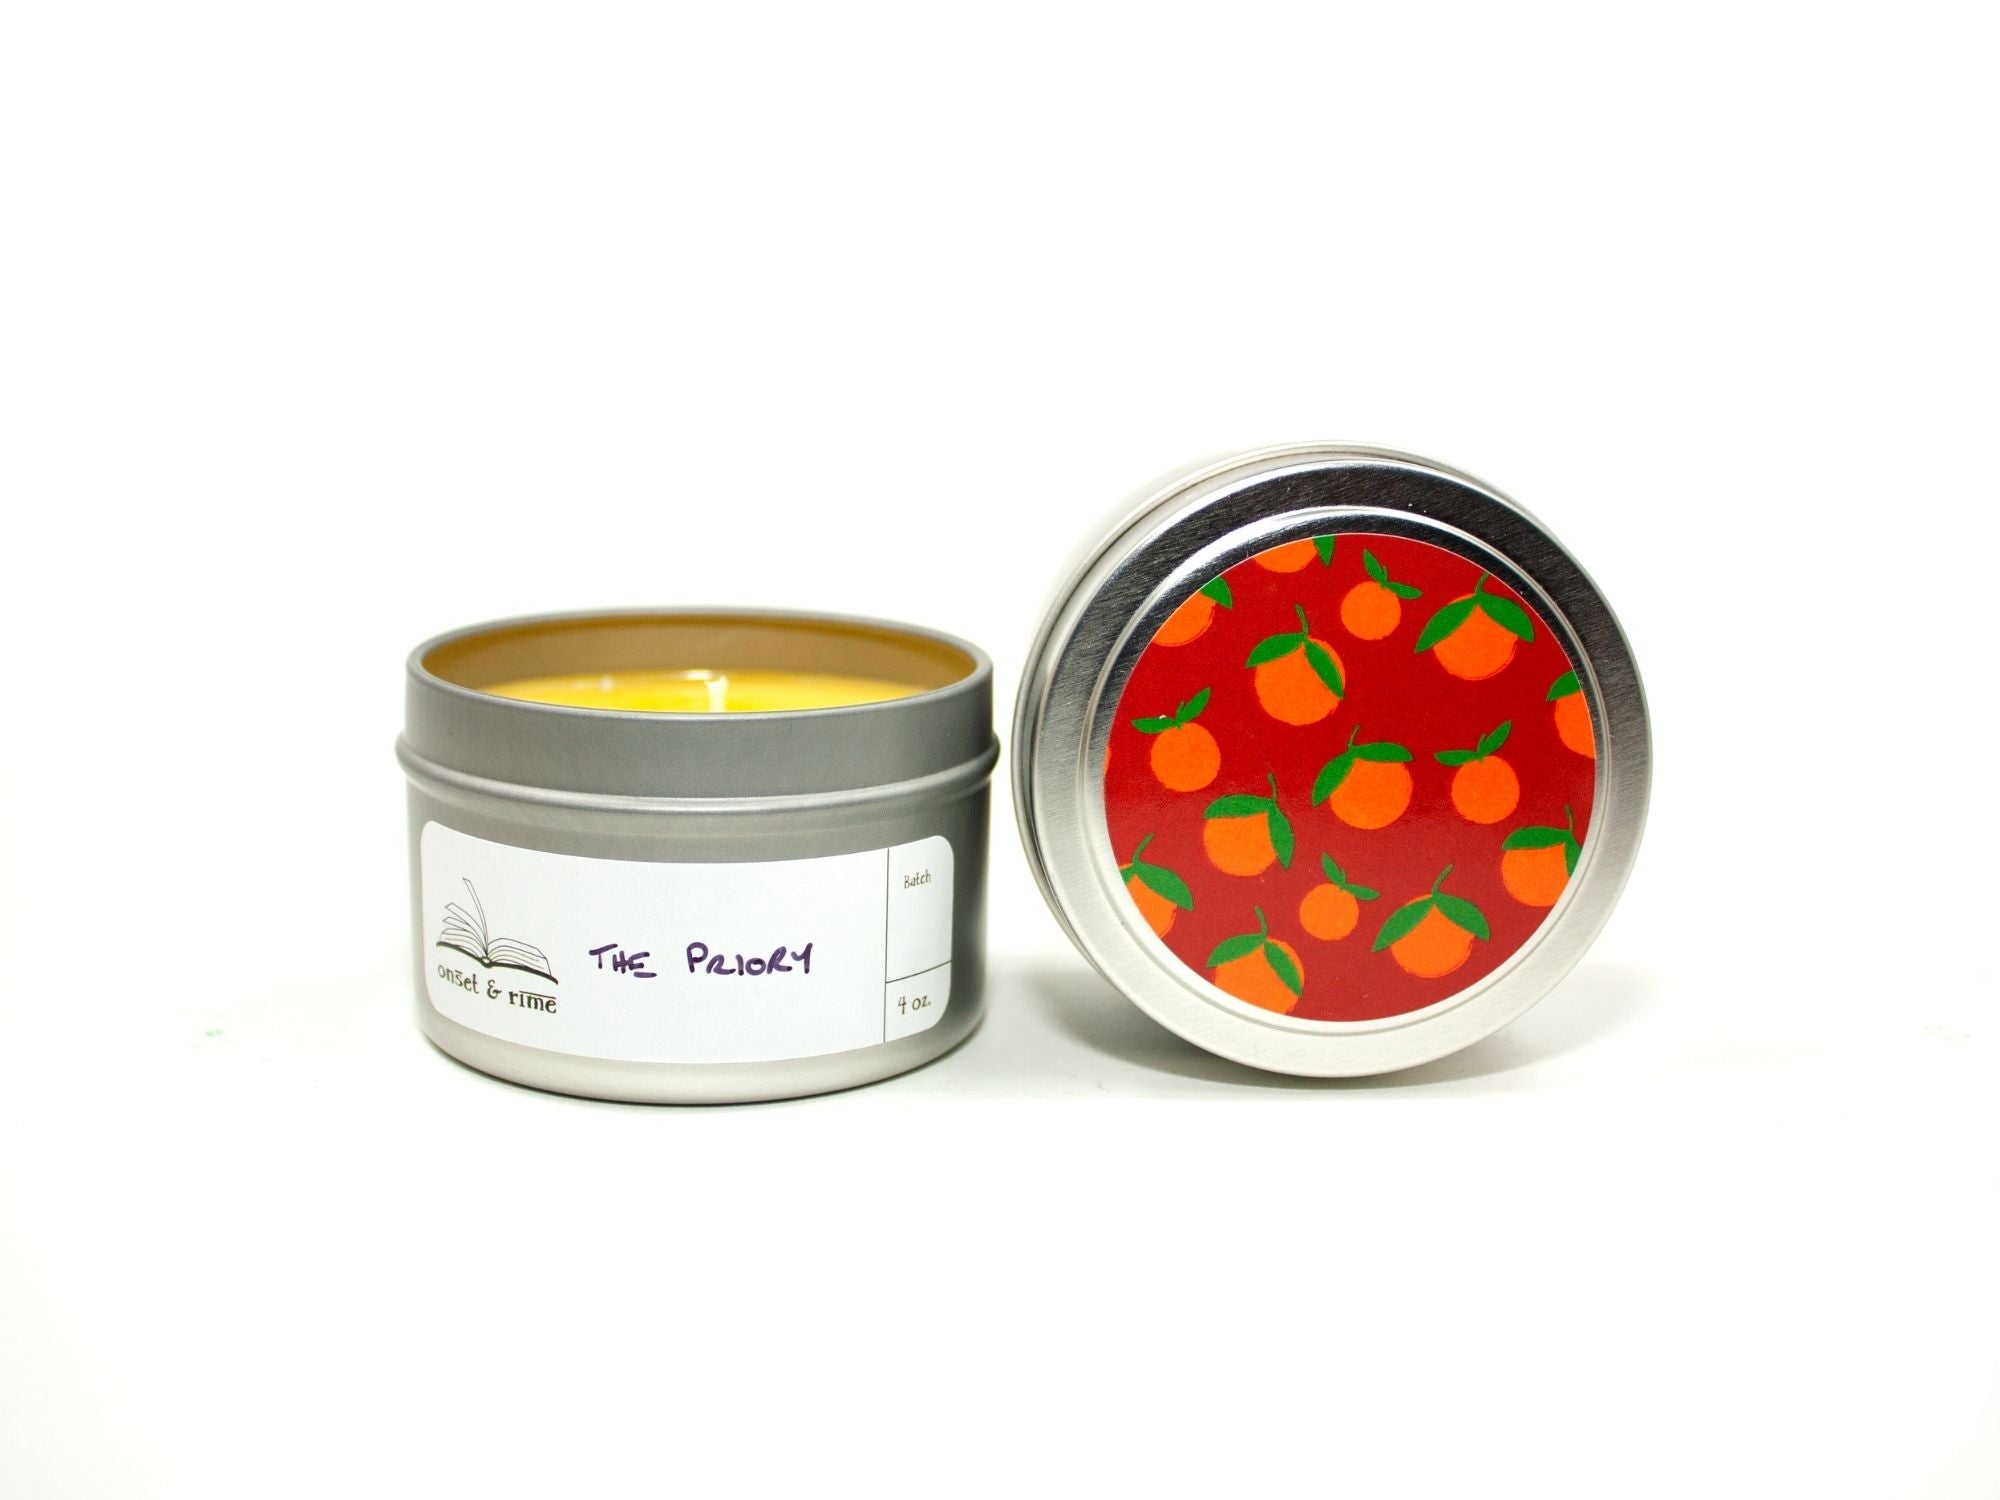 Onset & Rime spiced orange scented candle called 